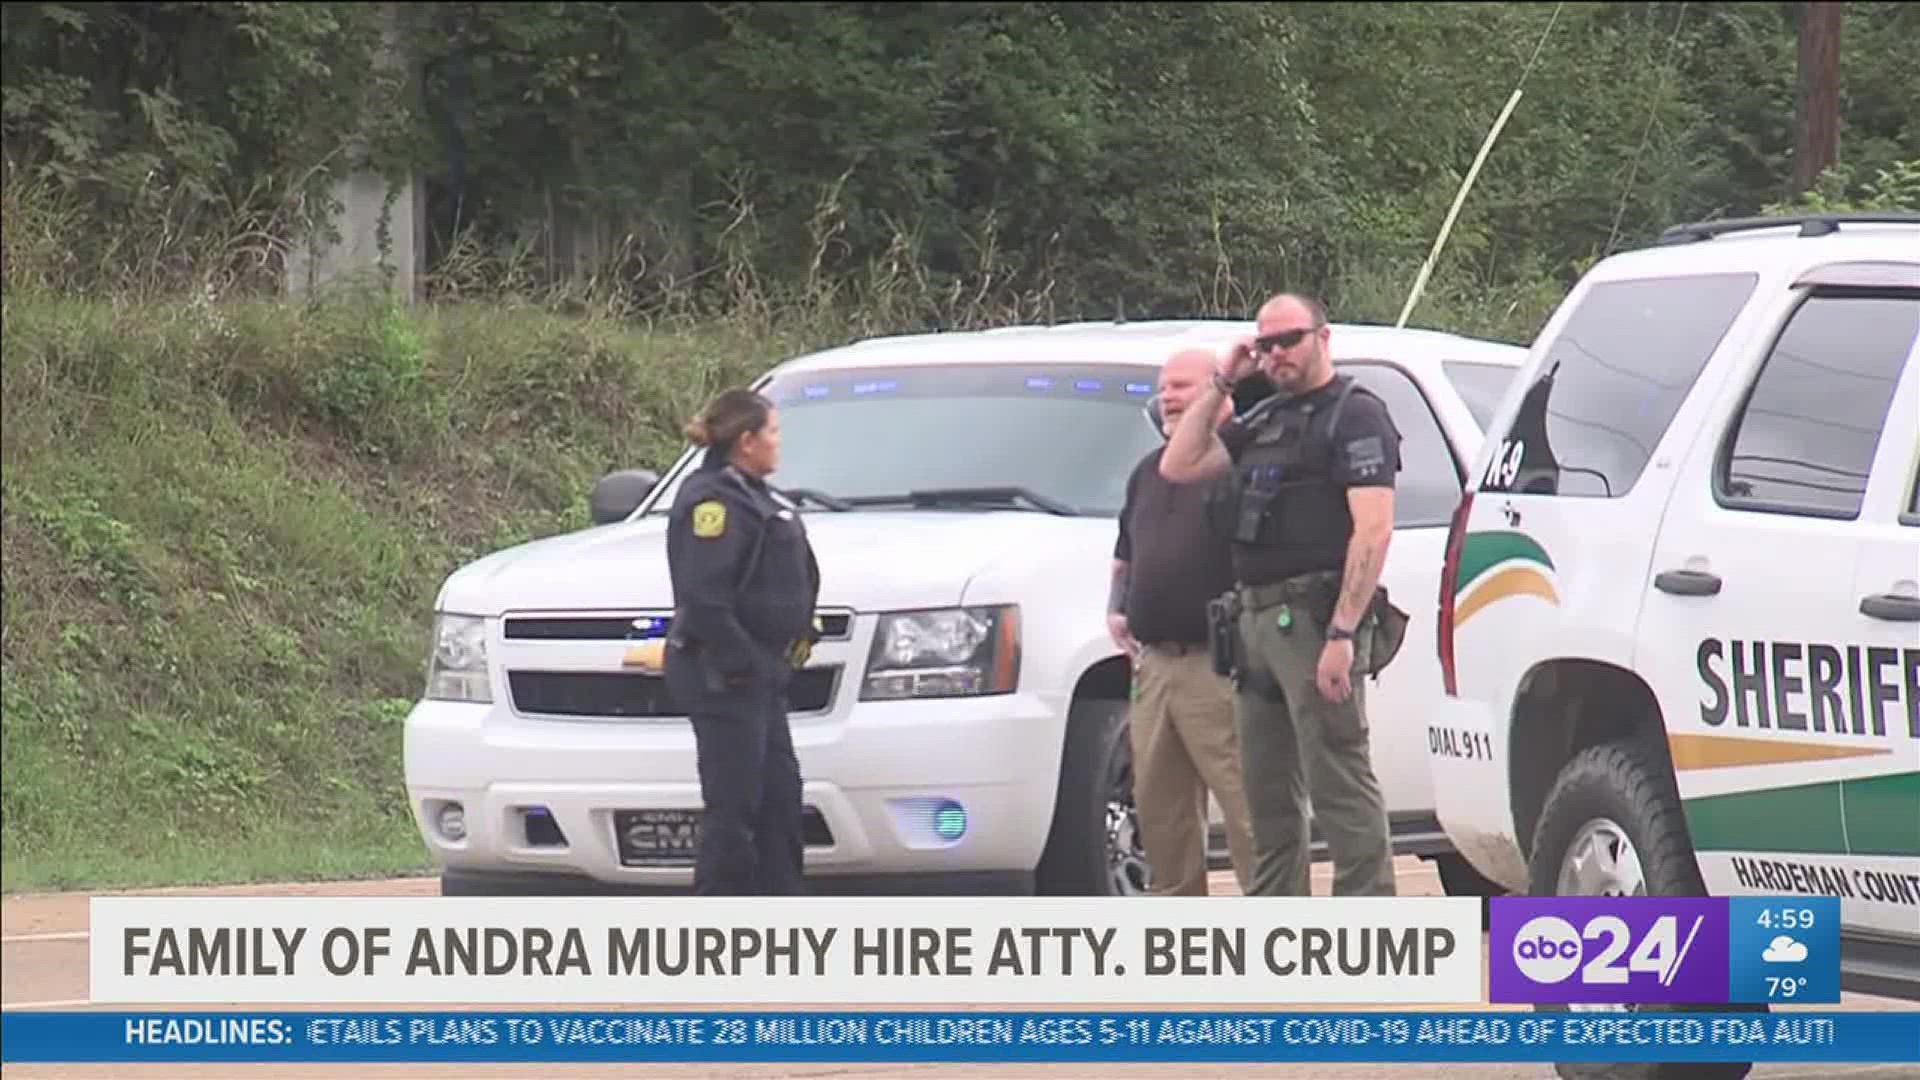 The family of Andra Murphy, shot and killed by police in Bolivar, Tennessee, earlier this month, have hired attorney Ben Crump.